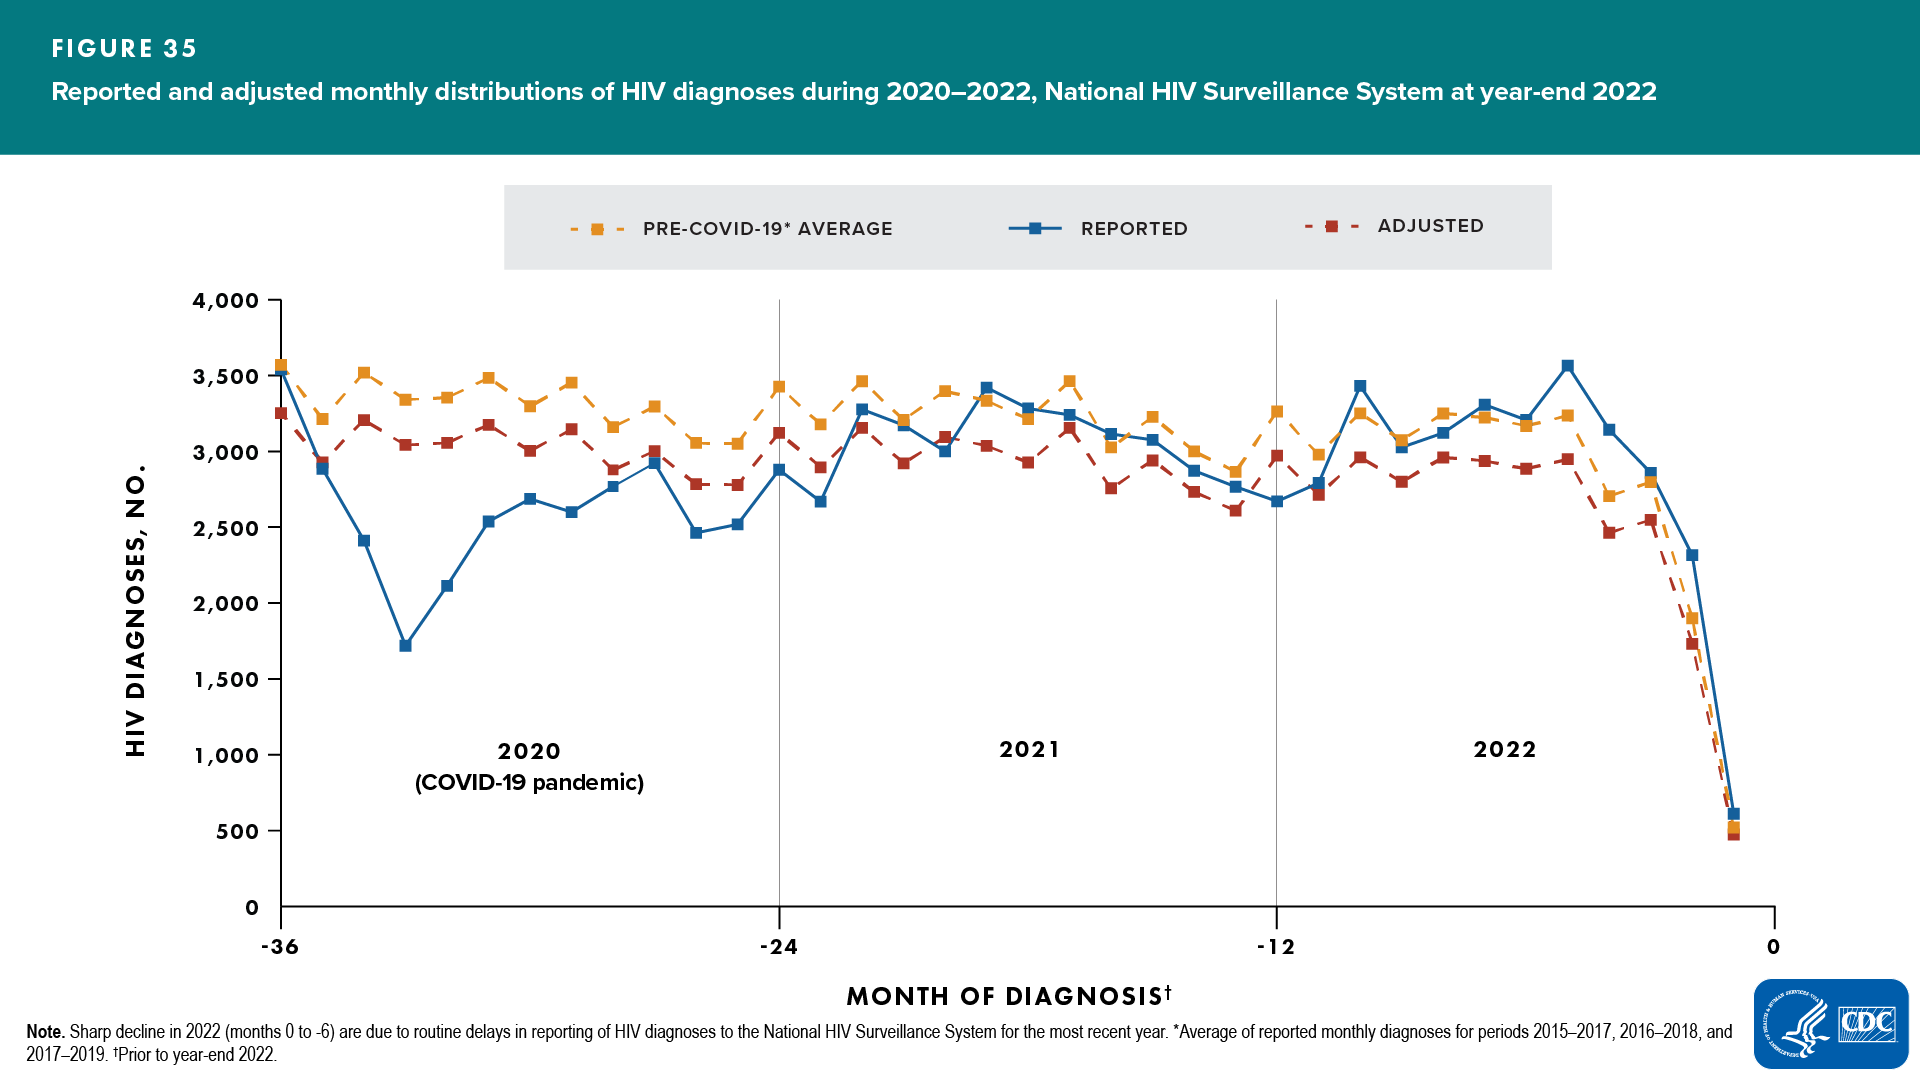 Figure 35. Reported and adjusted monthly distributions of HIV diagnoses during 2020–2022, National HIV Surveillance System data at year-end 2022